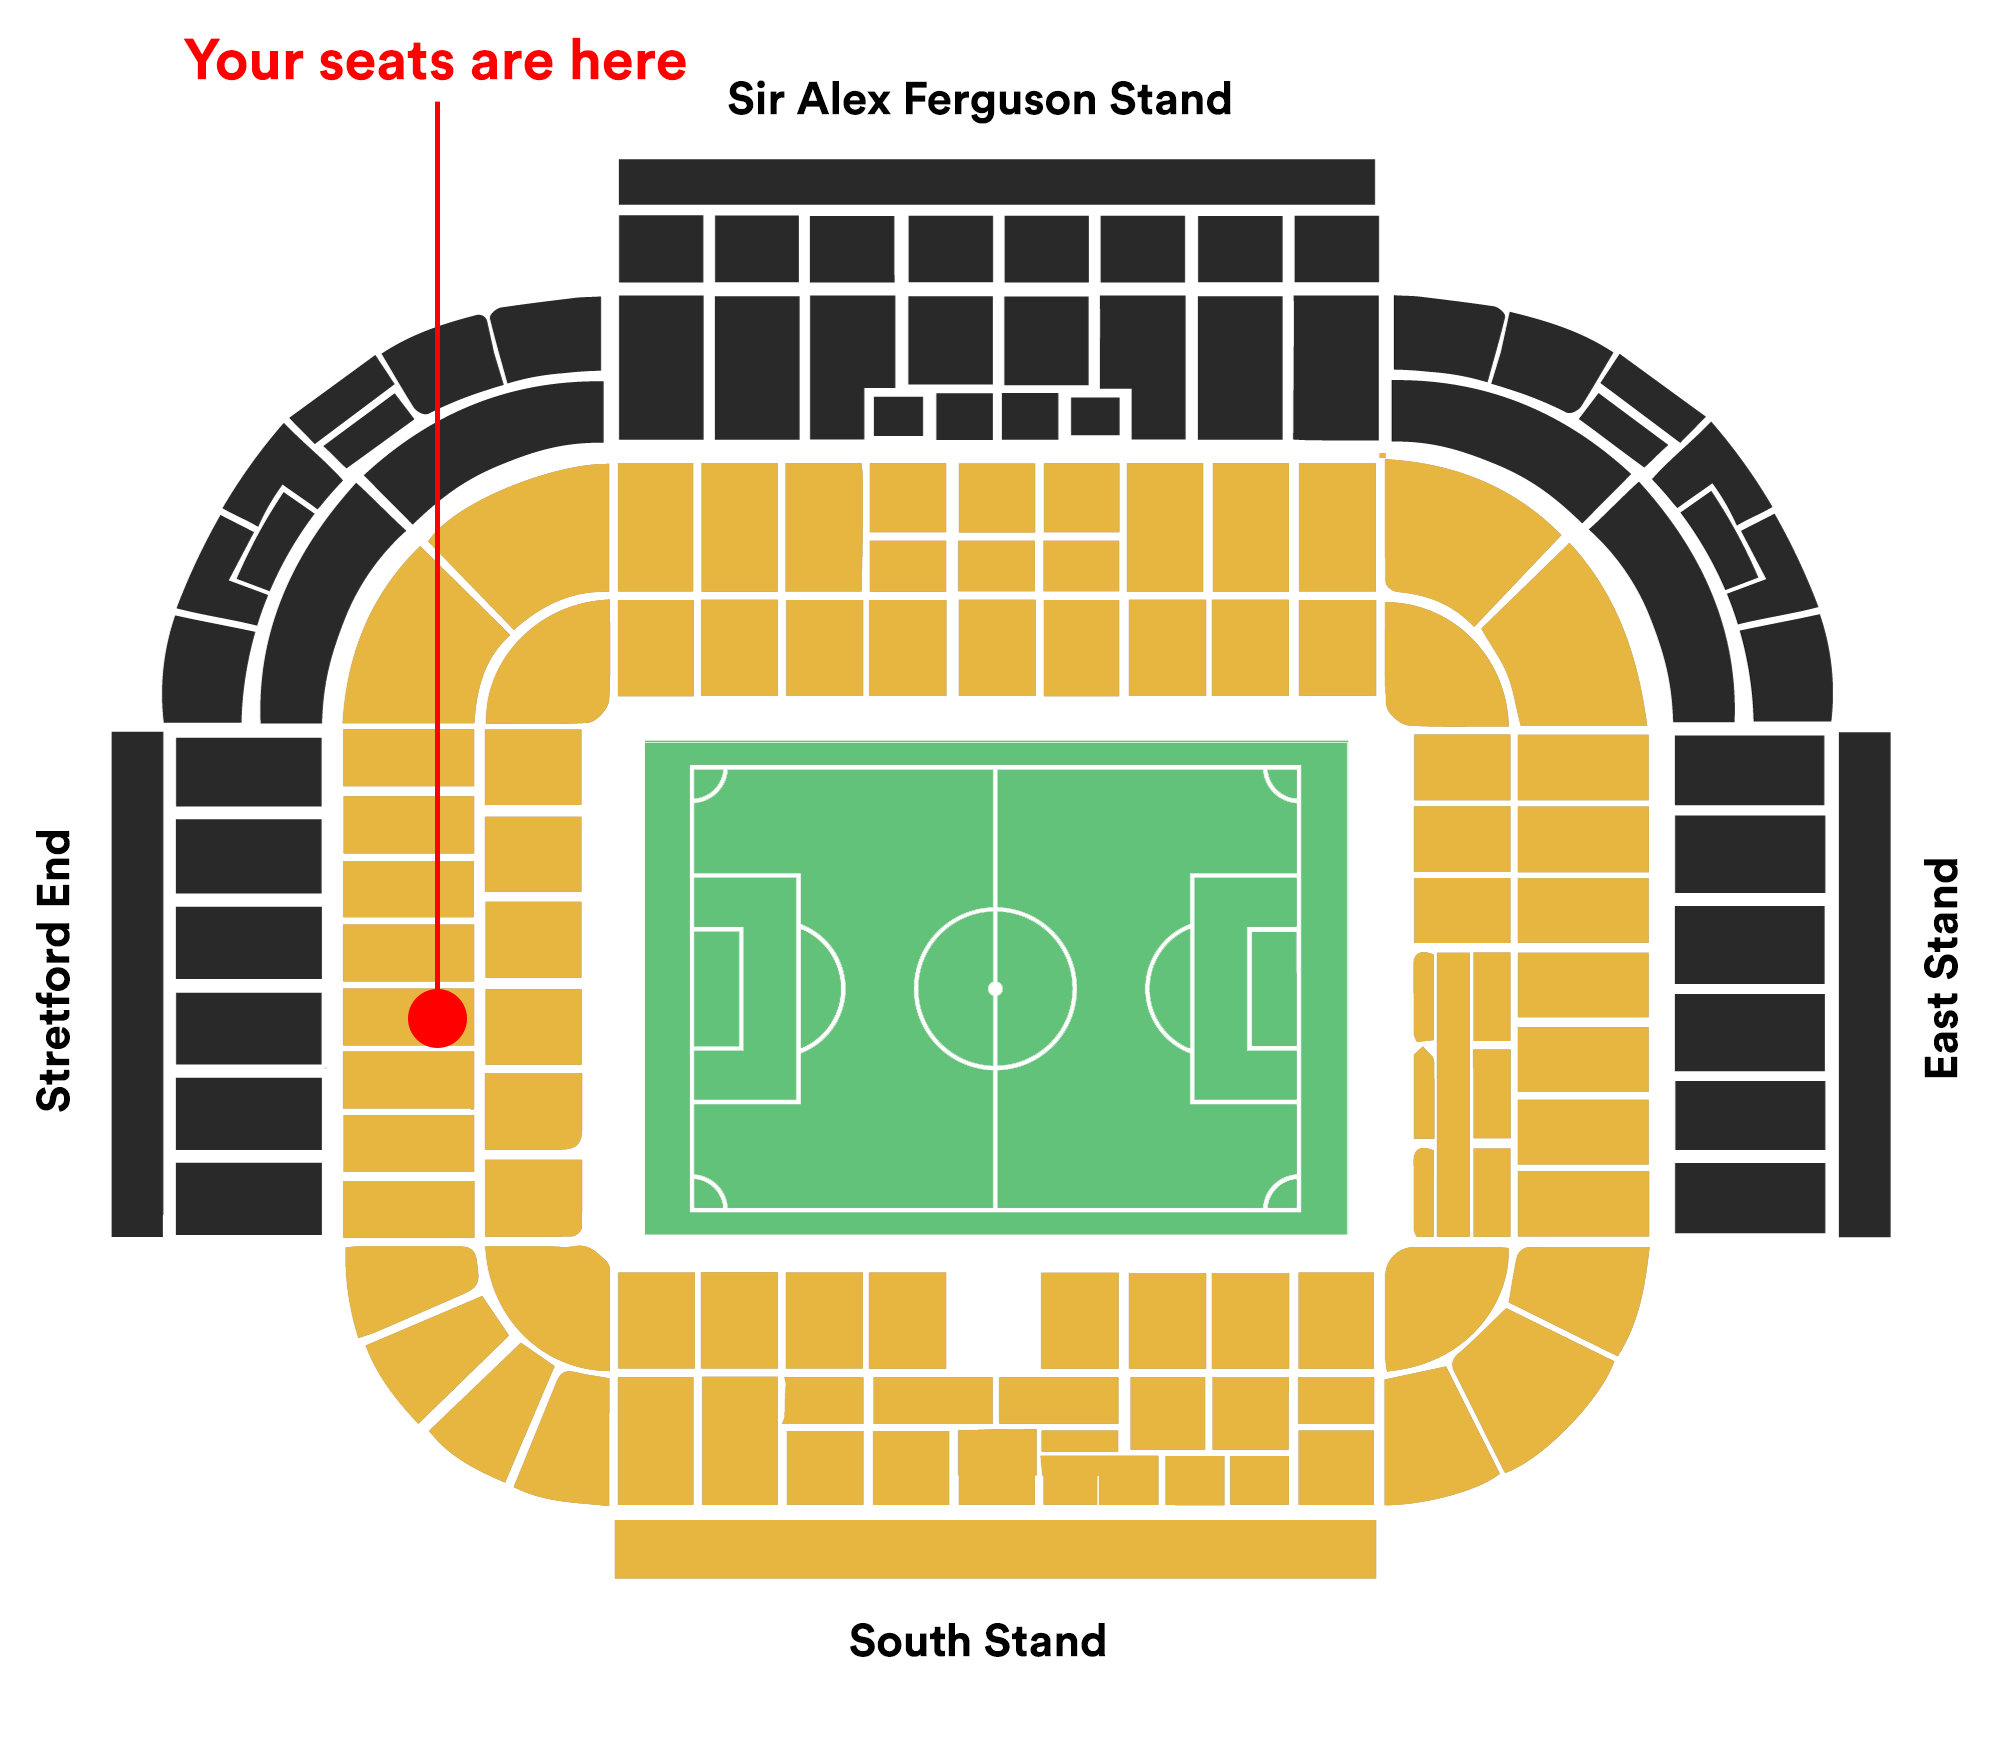 Seatmap for Stretford End with International Suite